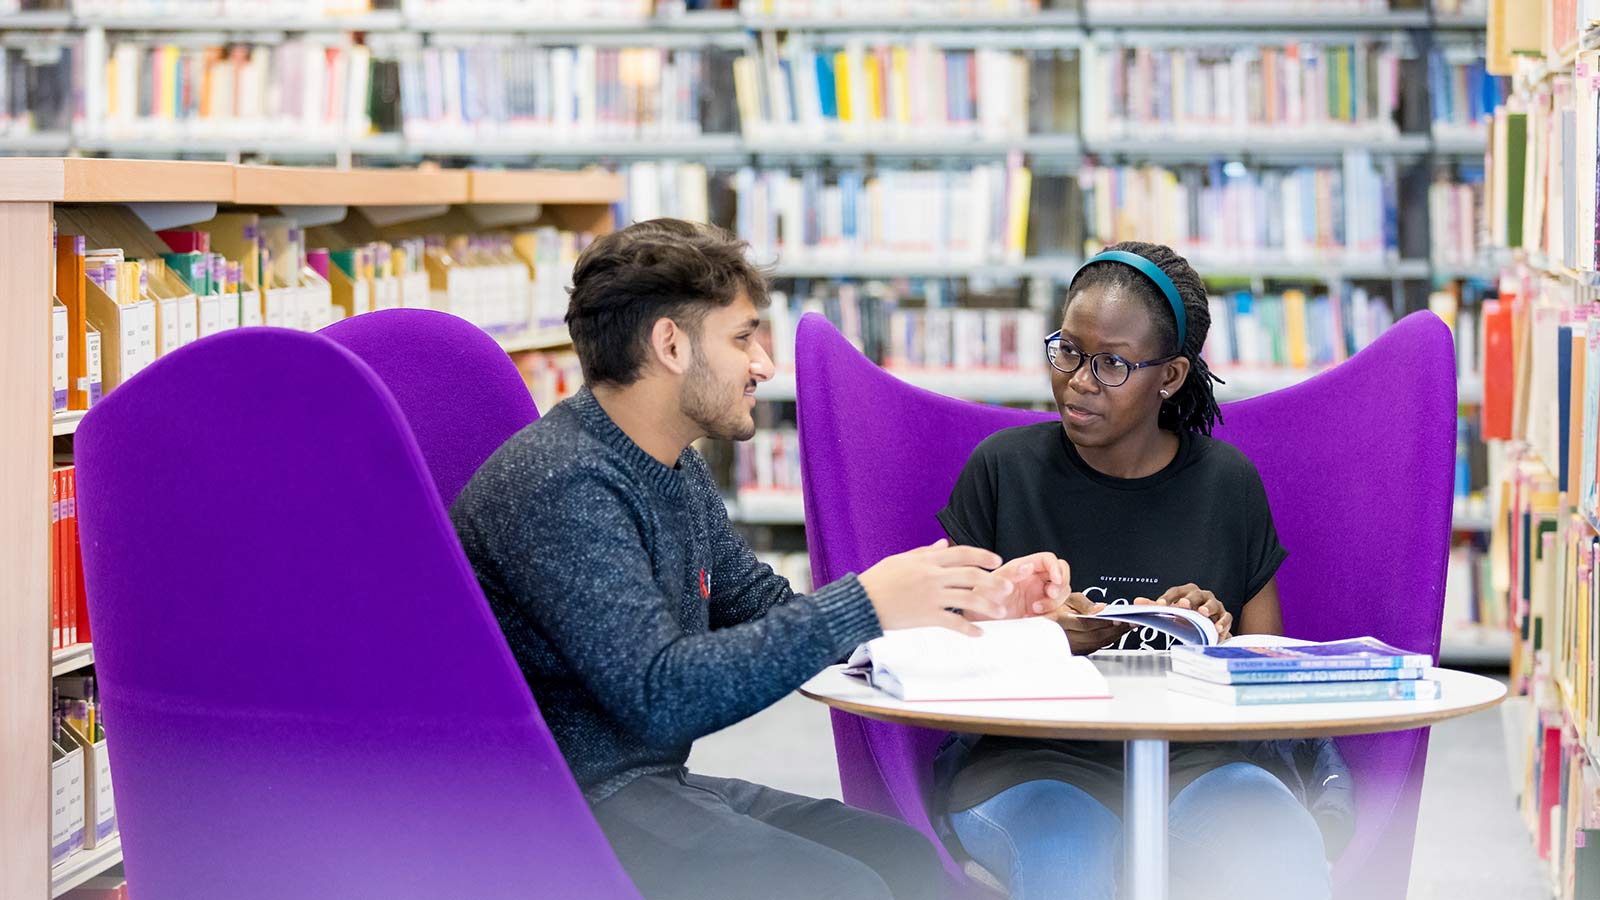 Kingston University students sat in the library